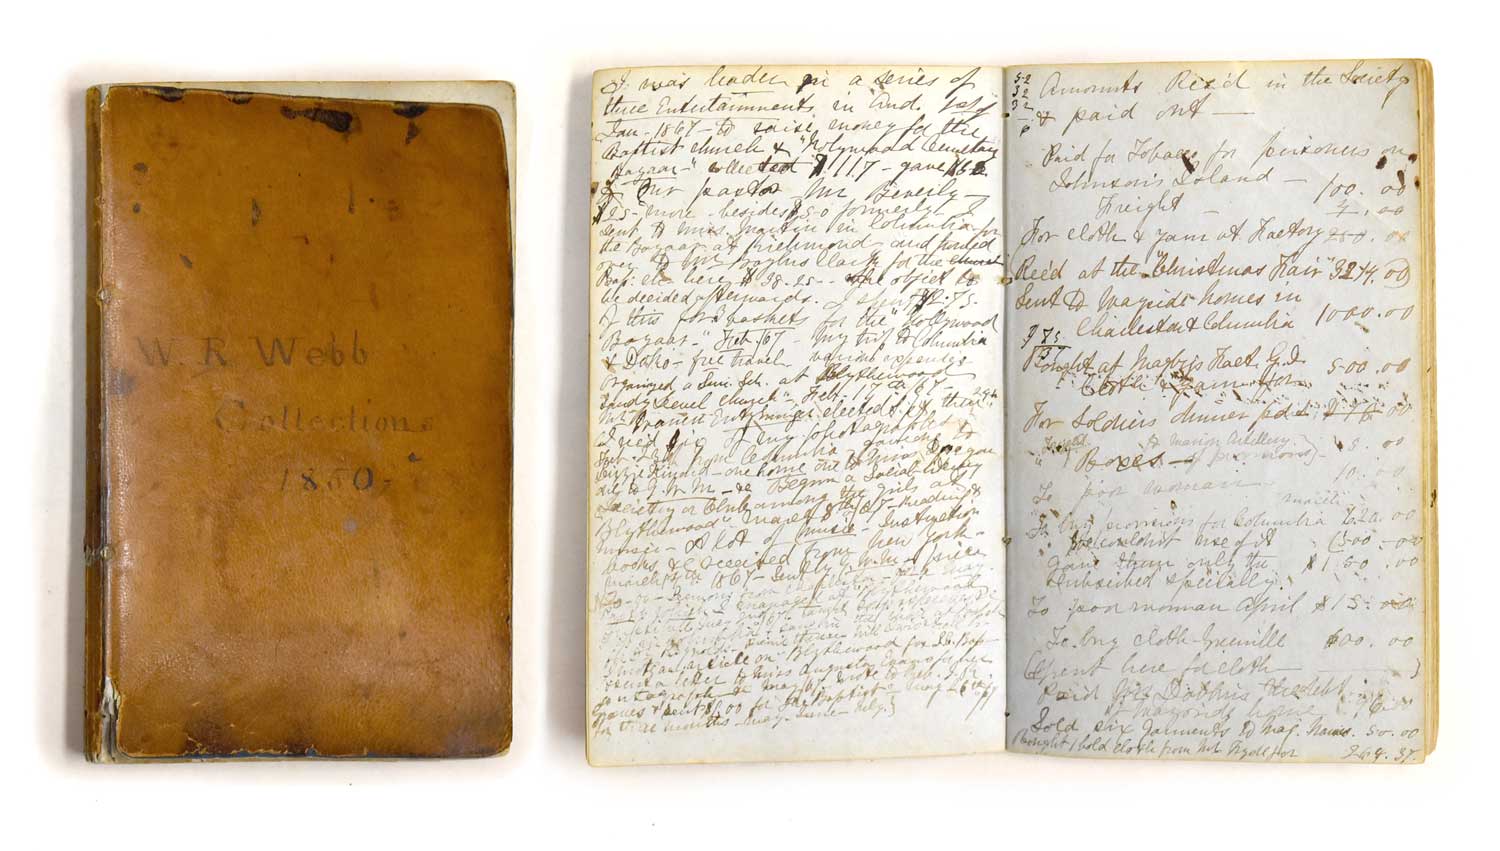 Handwritten journal and cover of journal